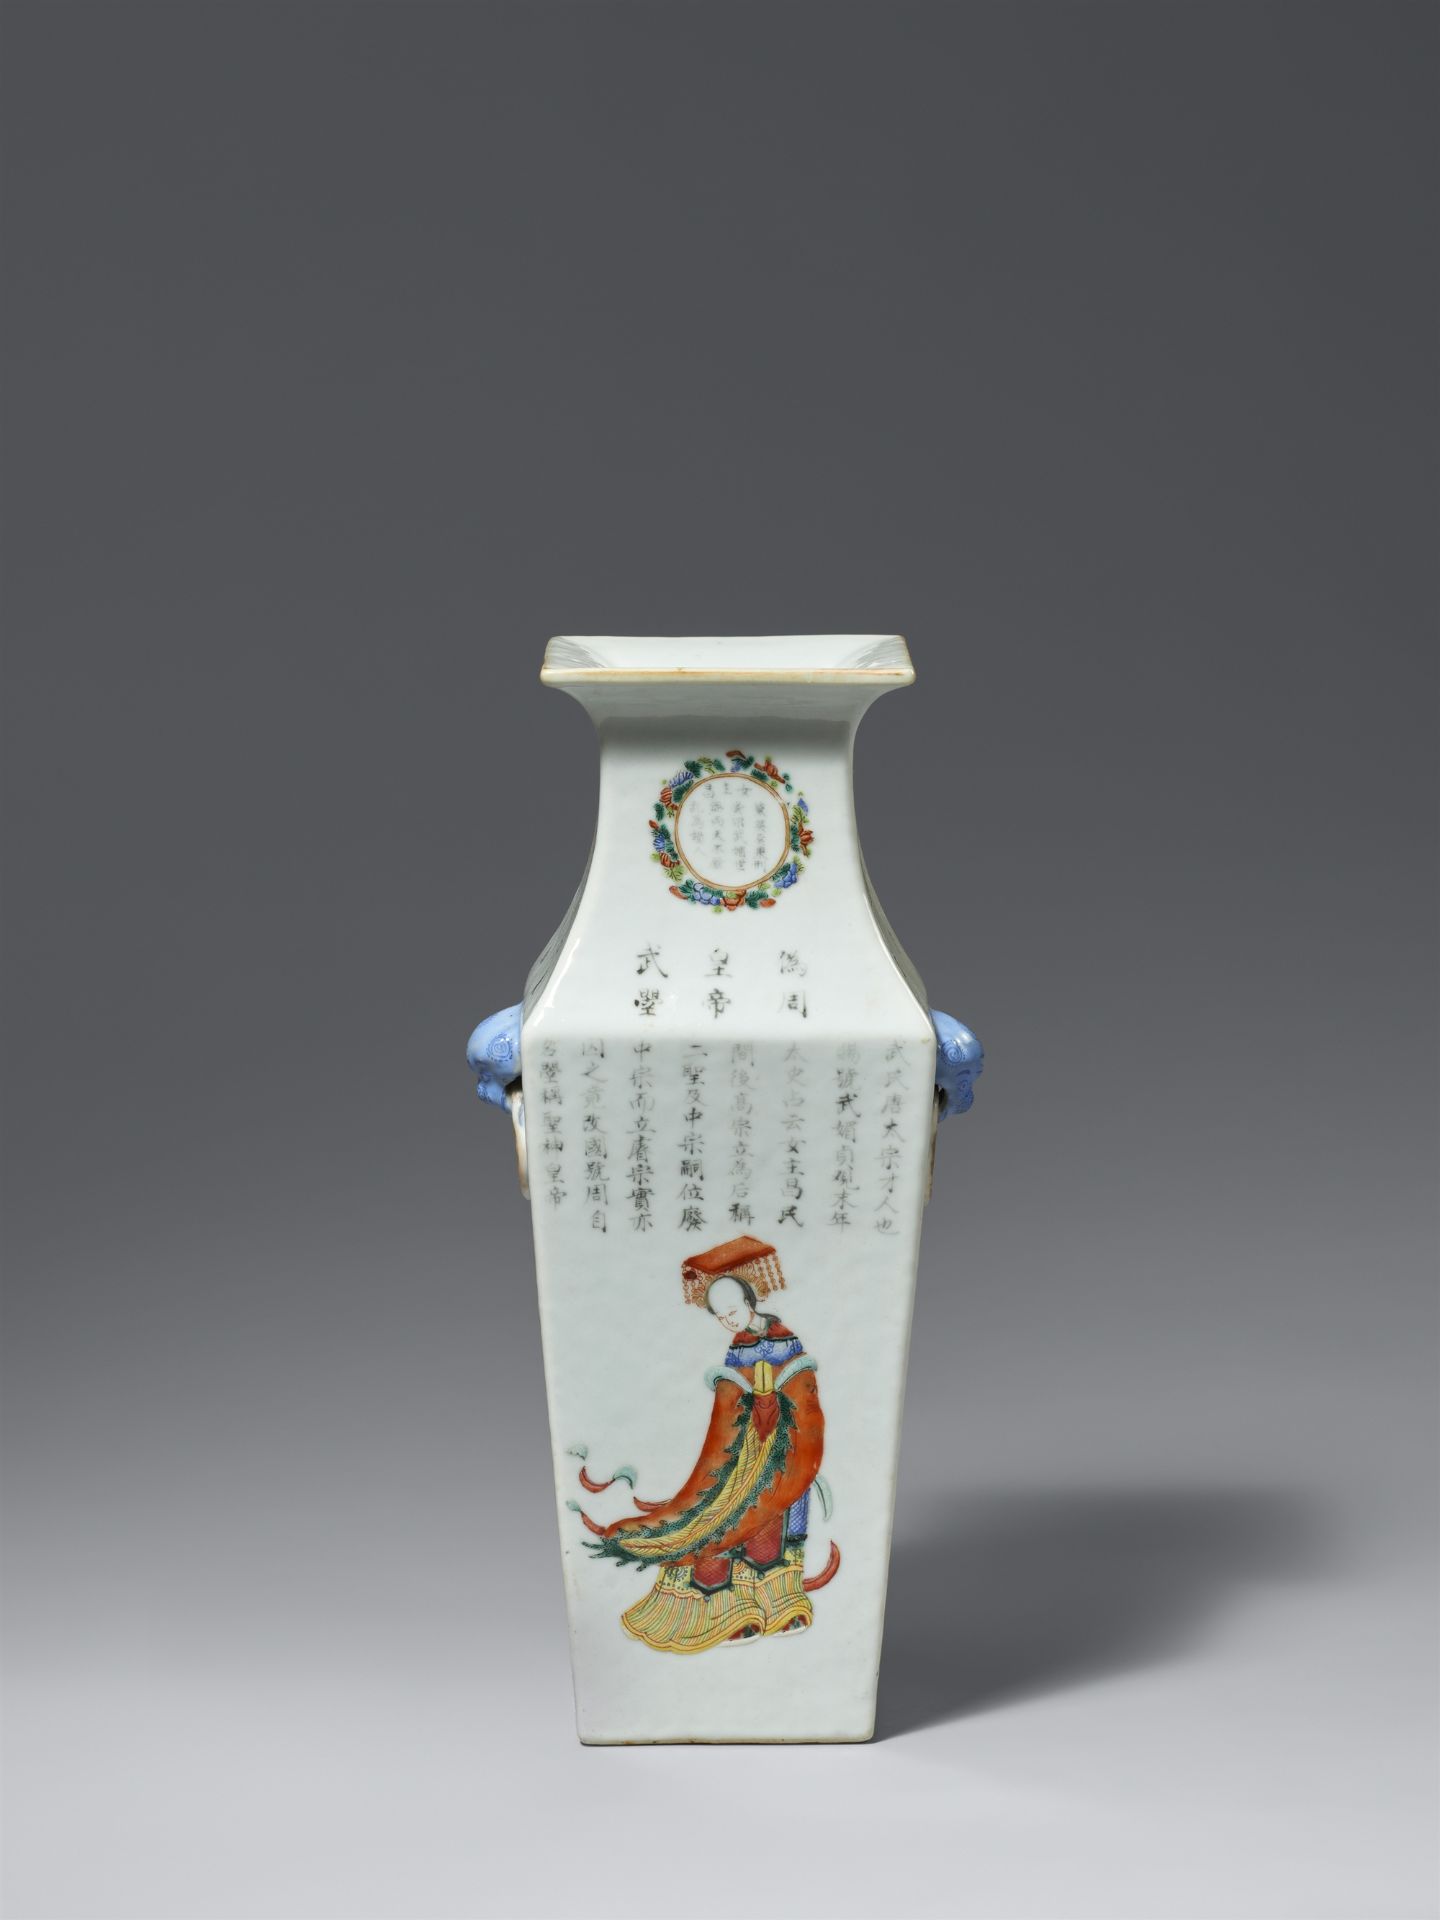 A famille rose Wu Shuang Pu vase. Late Qing dynasty, 19th century